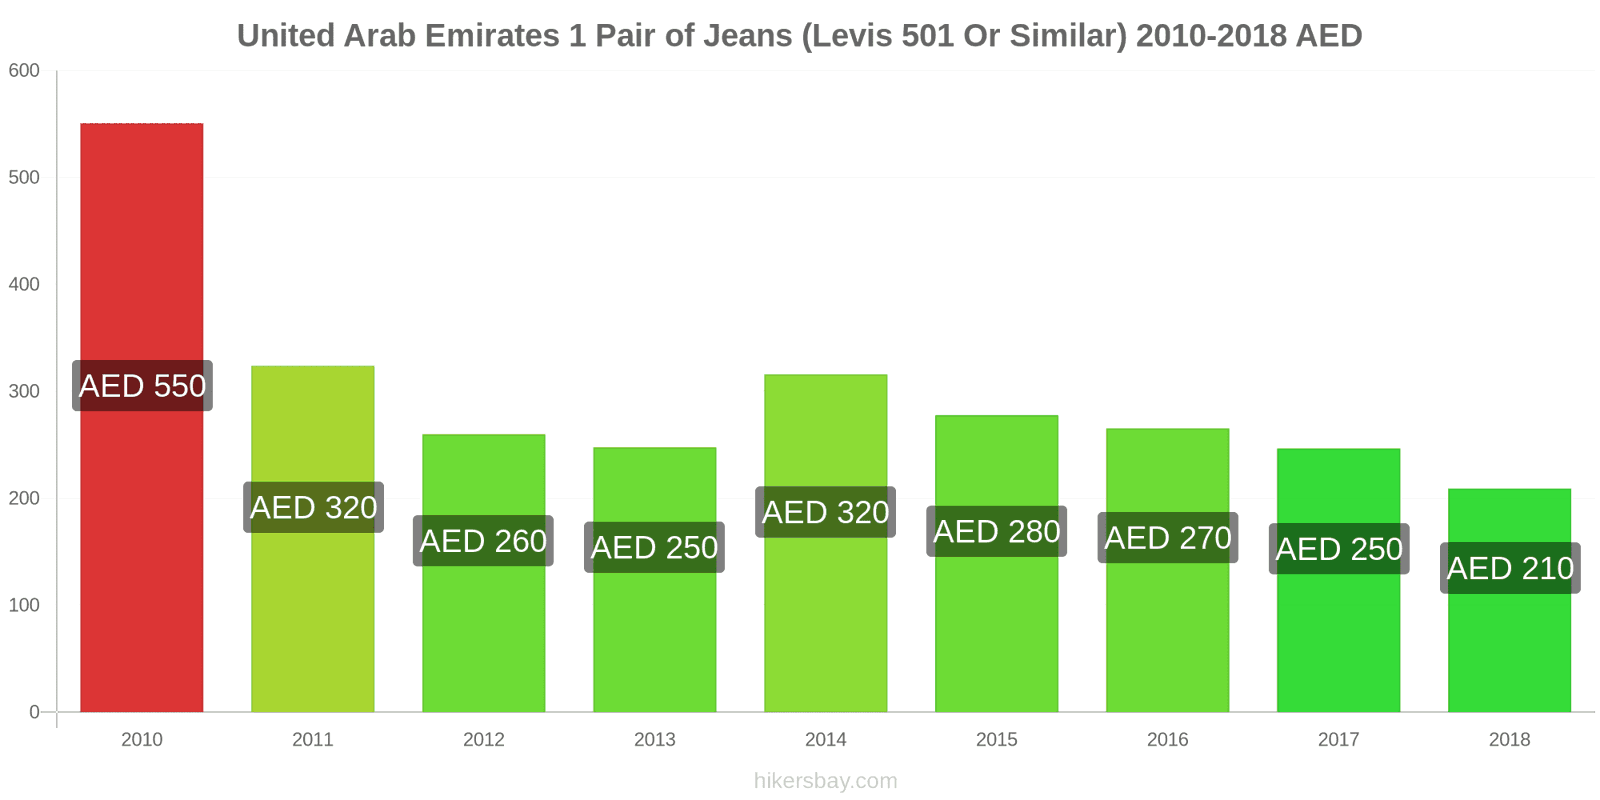 United Arab Emirates price changes 1 pair of jeans (Levis 501 or similar) hikersbay.com